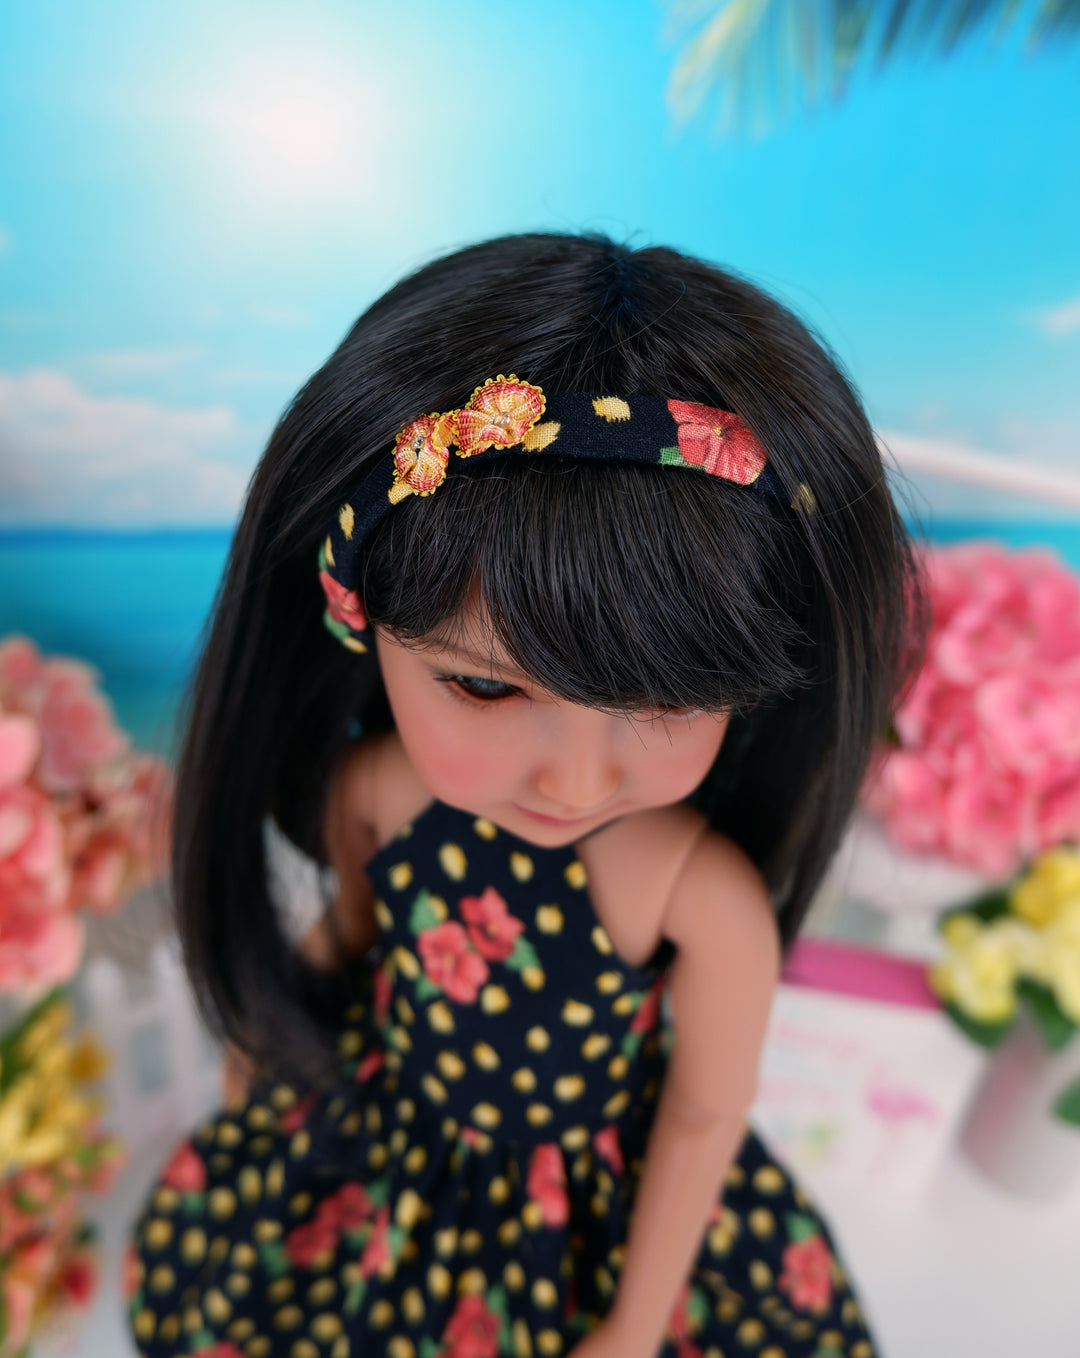 Caribbean Hibiscus - dress with shoes for Ruby Red Fashion Friends doll